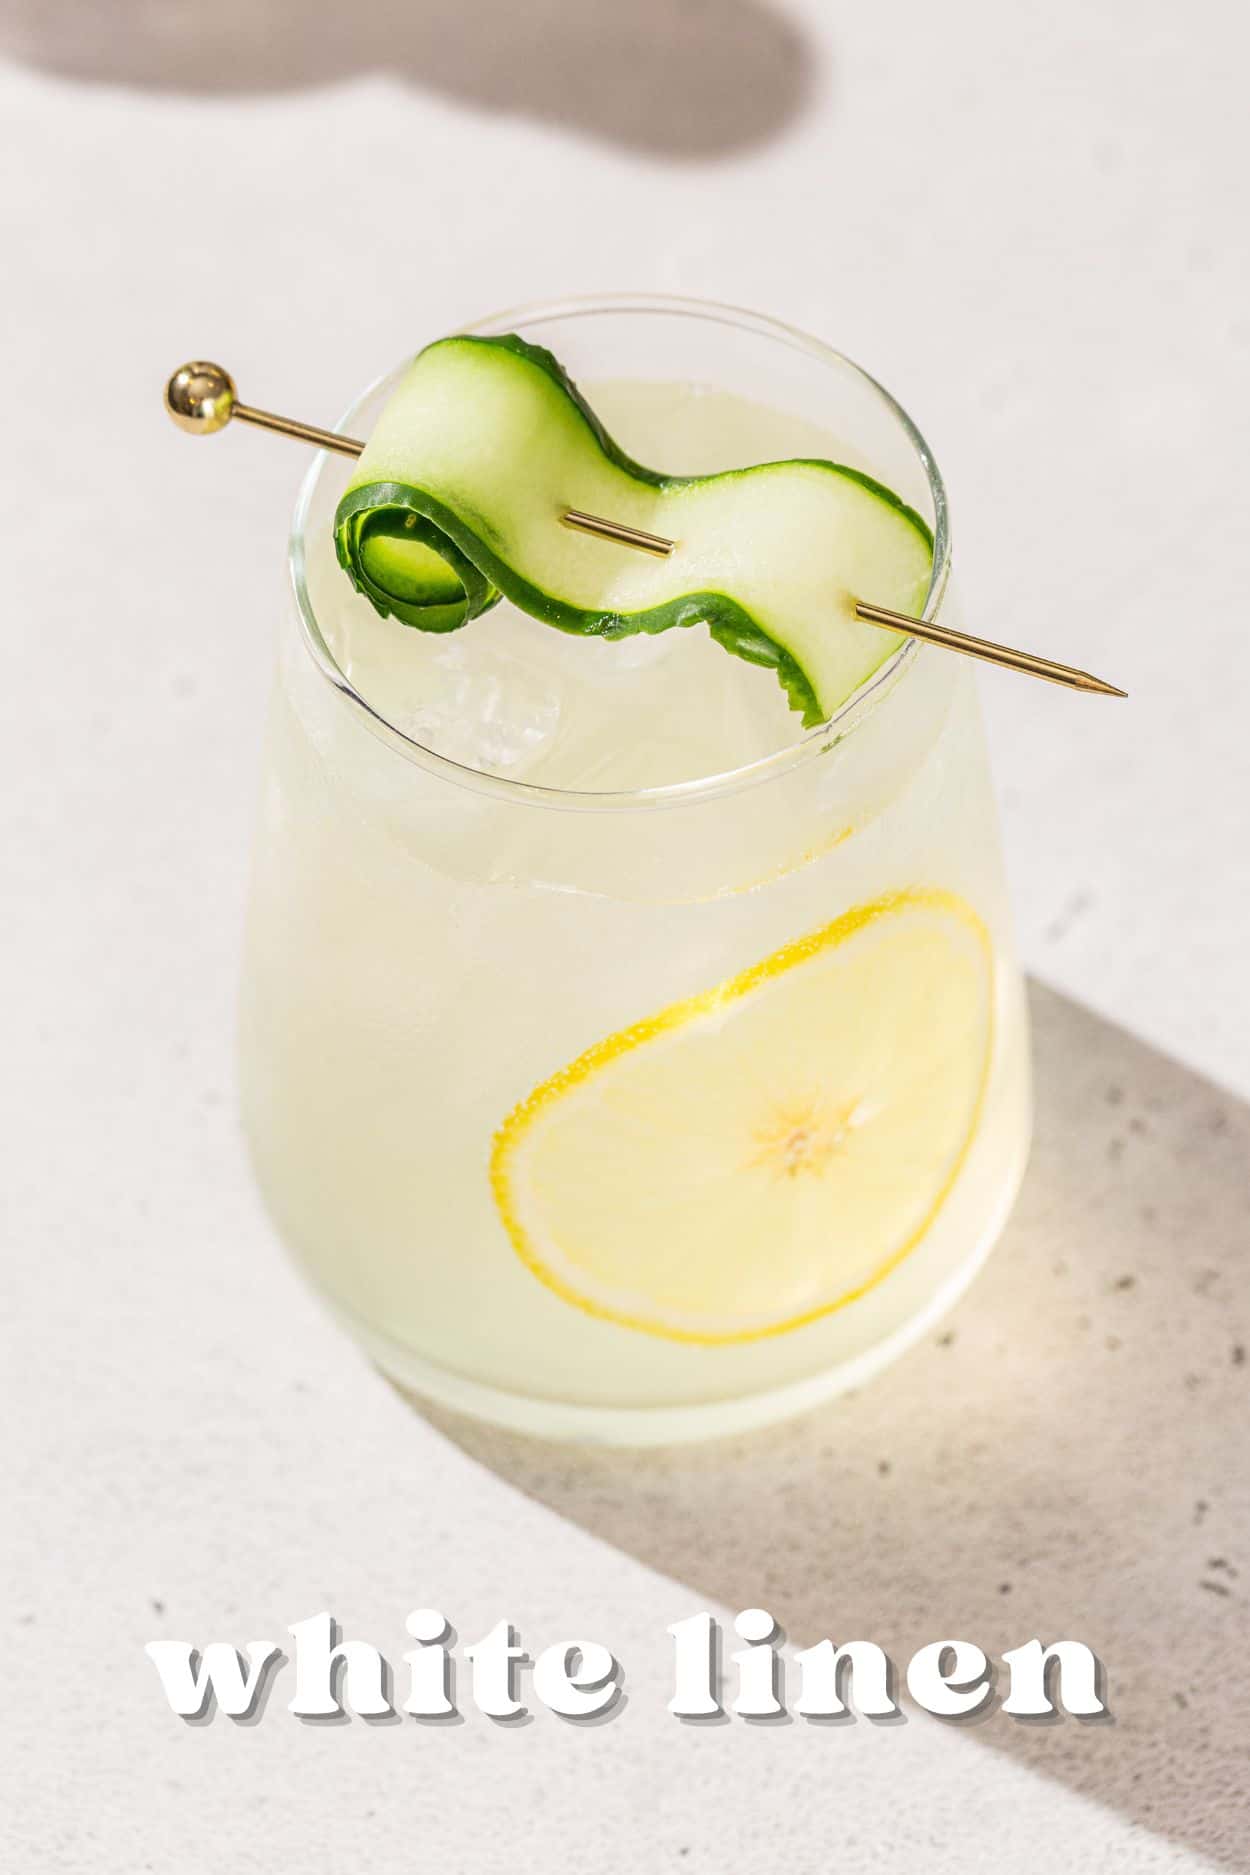 Overhead view of a refreshing-looking White Linen cocktail with a cucumber and lemon garnish. Text at the bottom says “Whte Linen”.